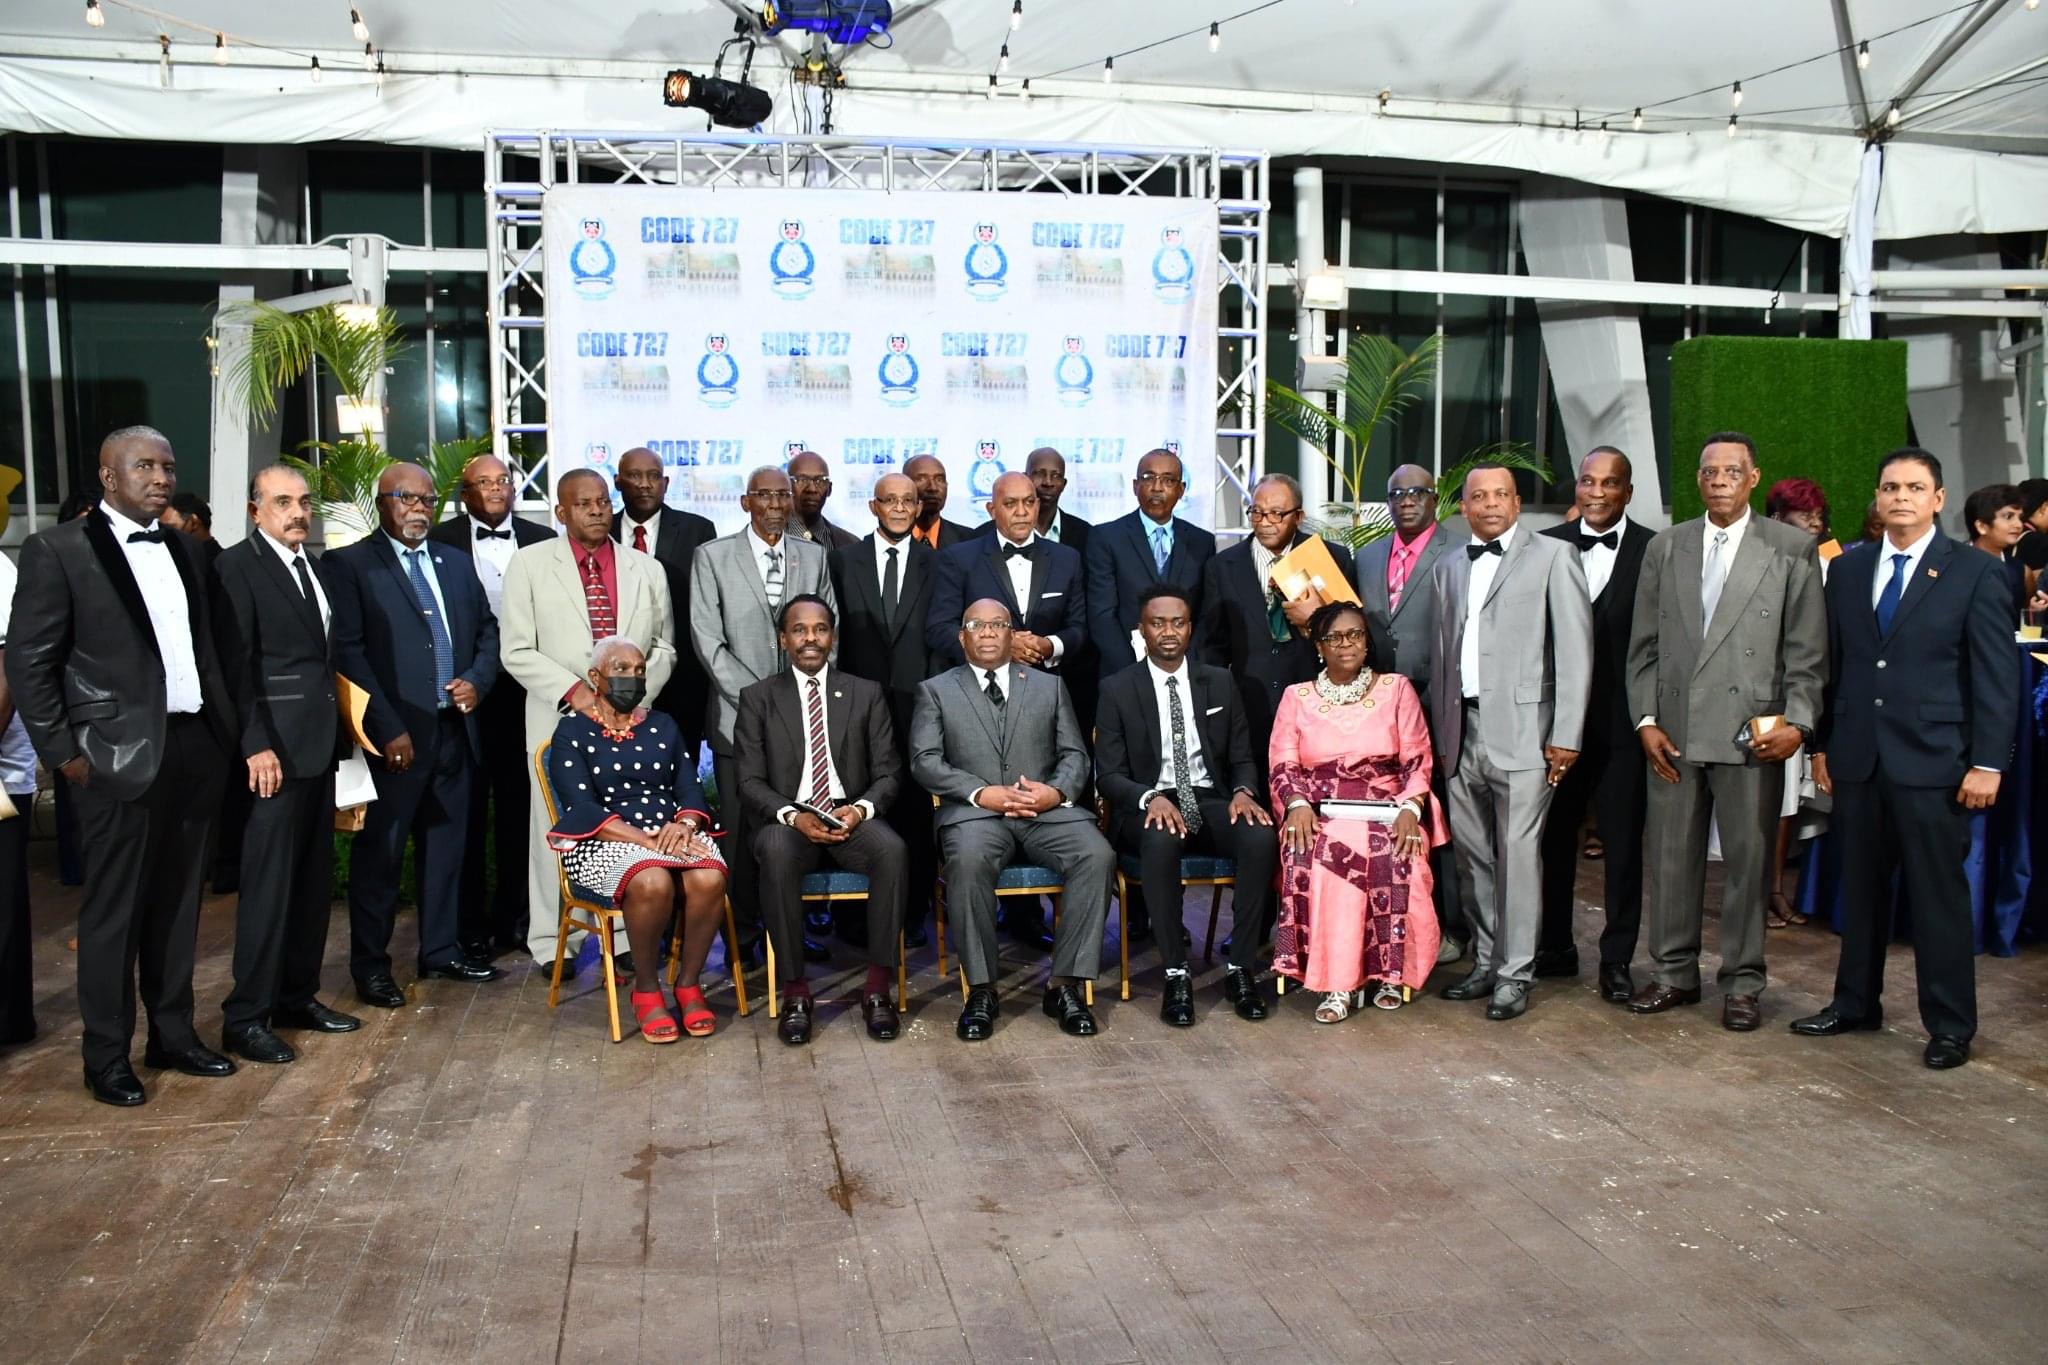 42 former and current police officers honoured for bravery during the 1990 attempted Coup